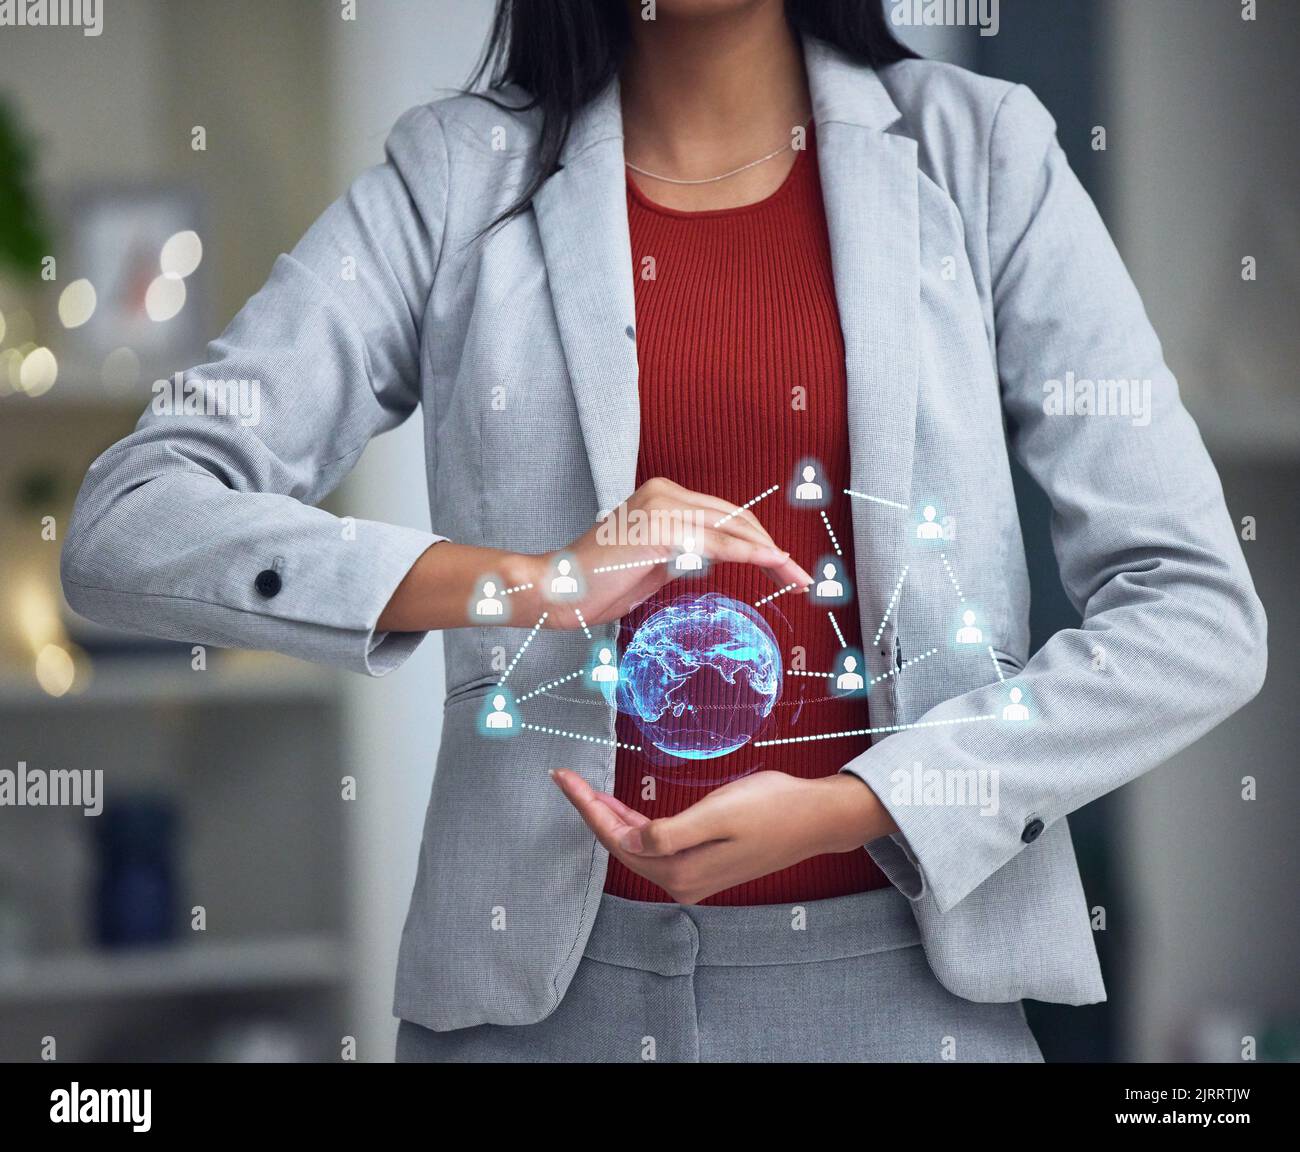 Technology, ai and networking of a business woman holding virtual interface at work. Female big data leader showing her network and social connections Stock Photo